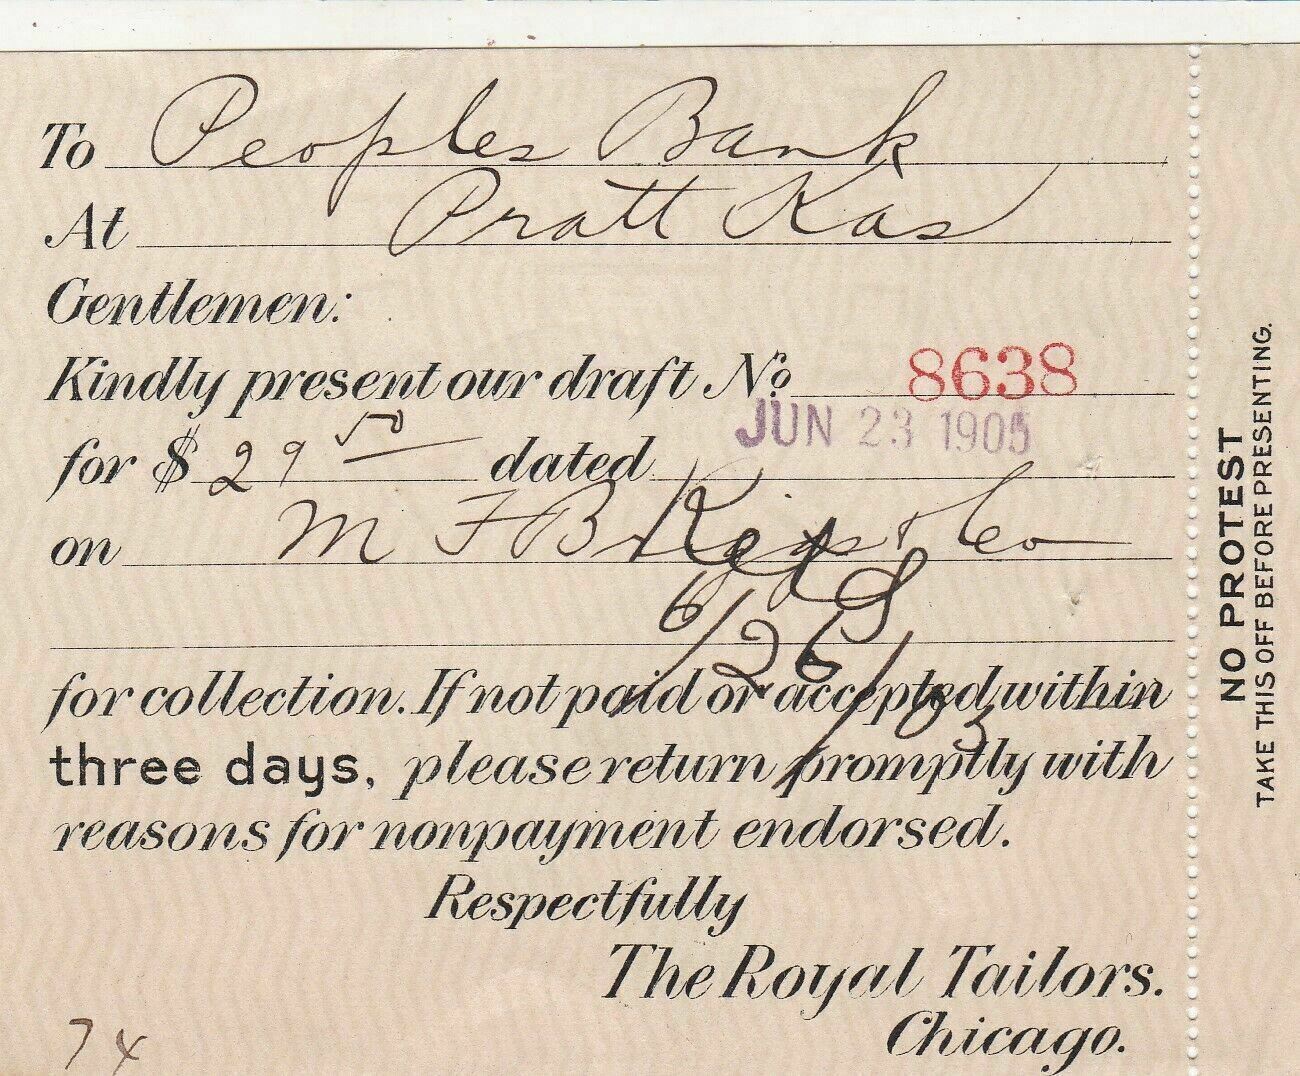 U.S. The Royal Tailors, Chicago 1905Invoice Slip + Attached Stub Ref 44283